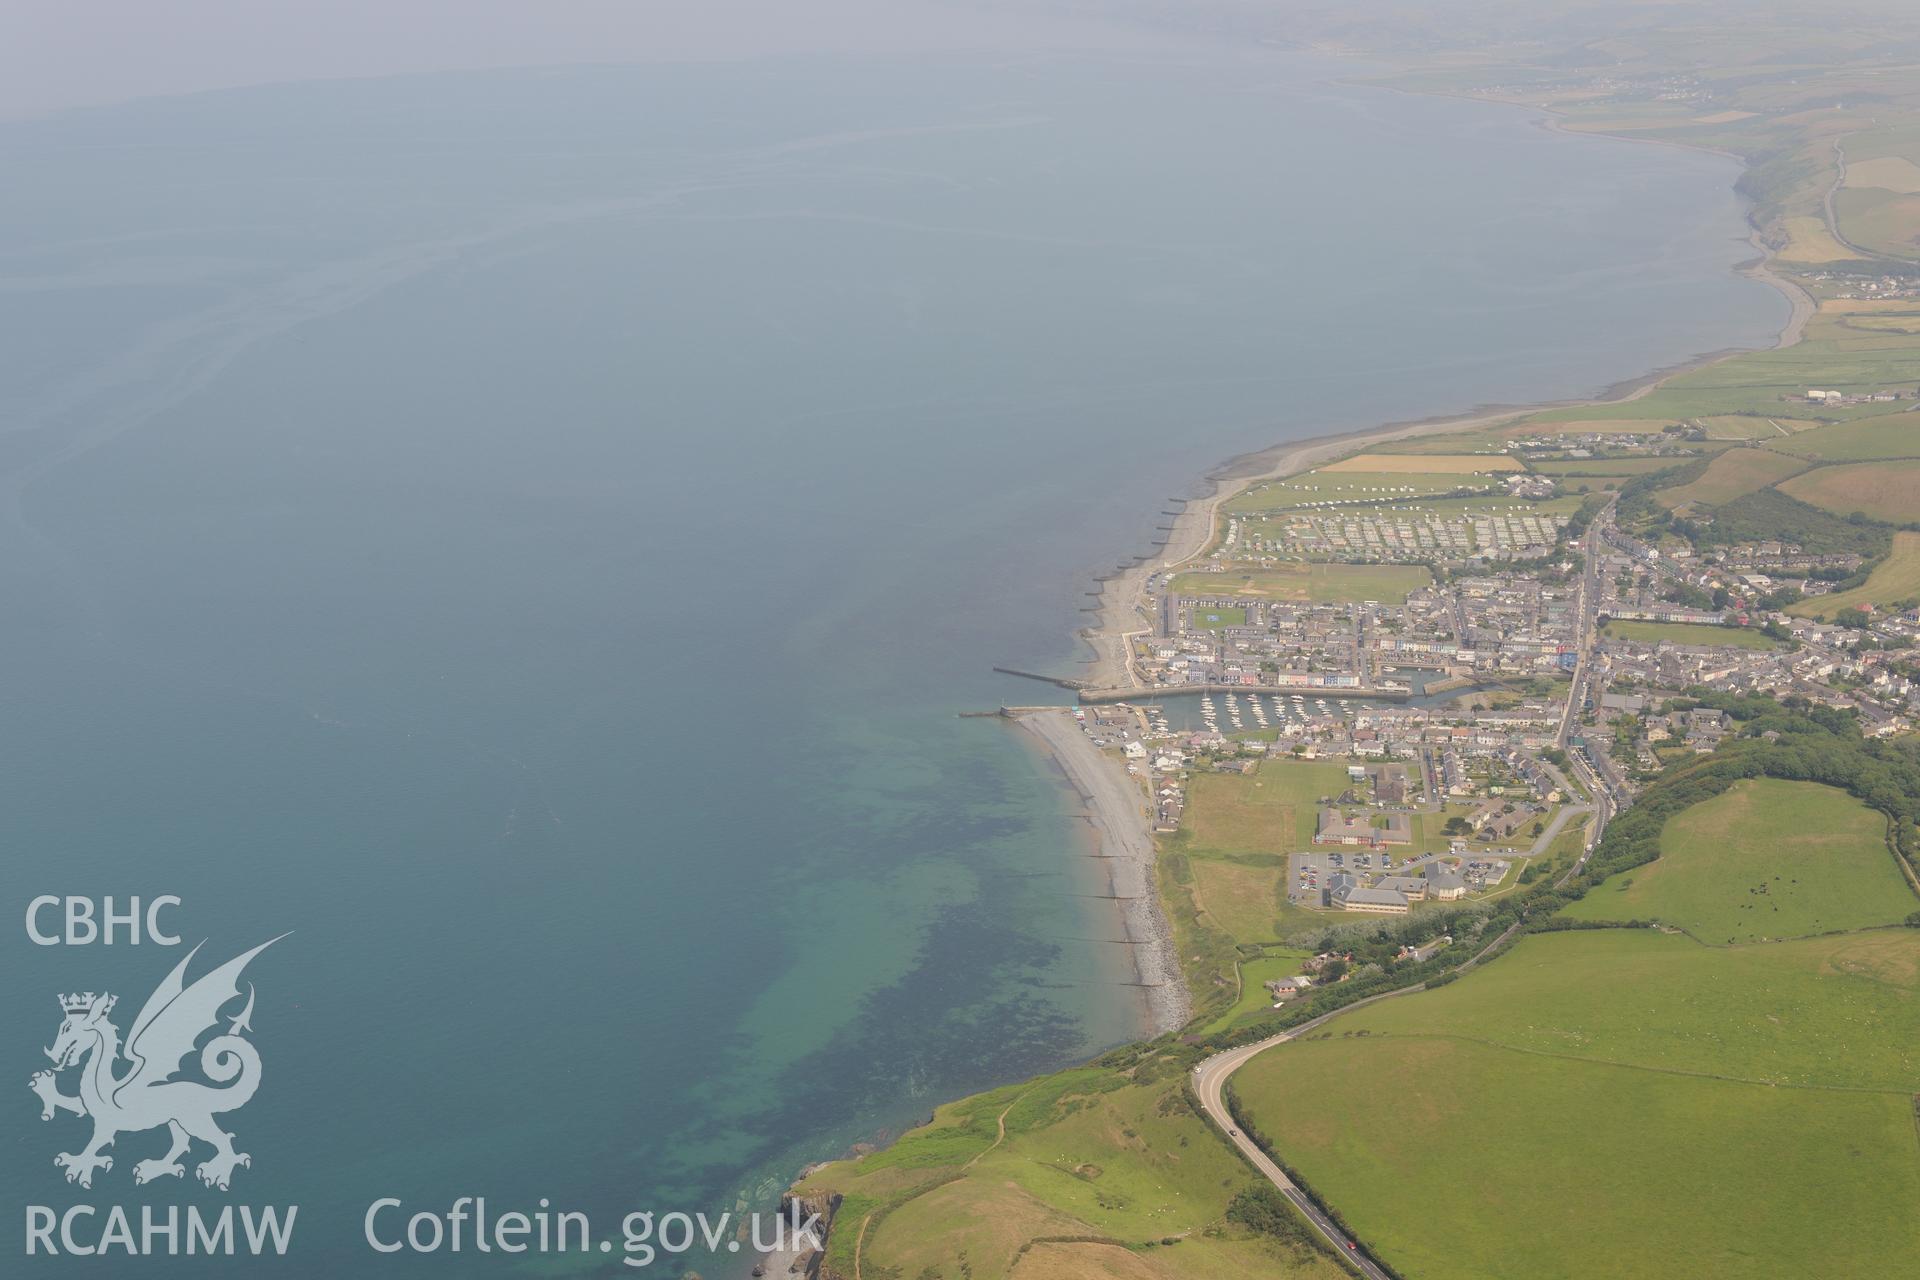 View of Aberaeron from the south west, showing the Penmorfa Council Buildings and Aberaeron Harbour. Oblique aerial photograph taken during the Royal Commission?s programme of archaeological aerial reconnaissance by Toby Driver on 12th July 2013.